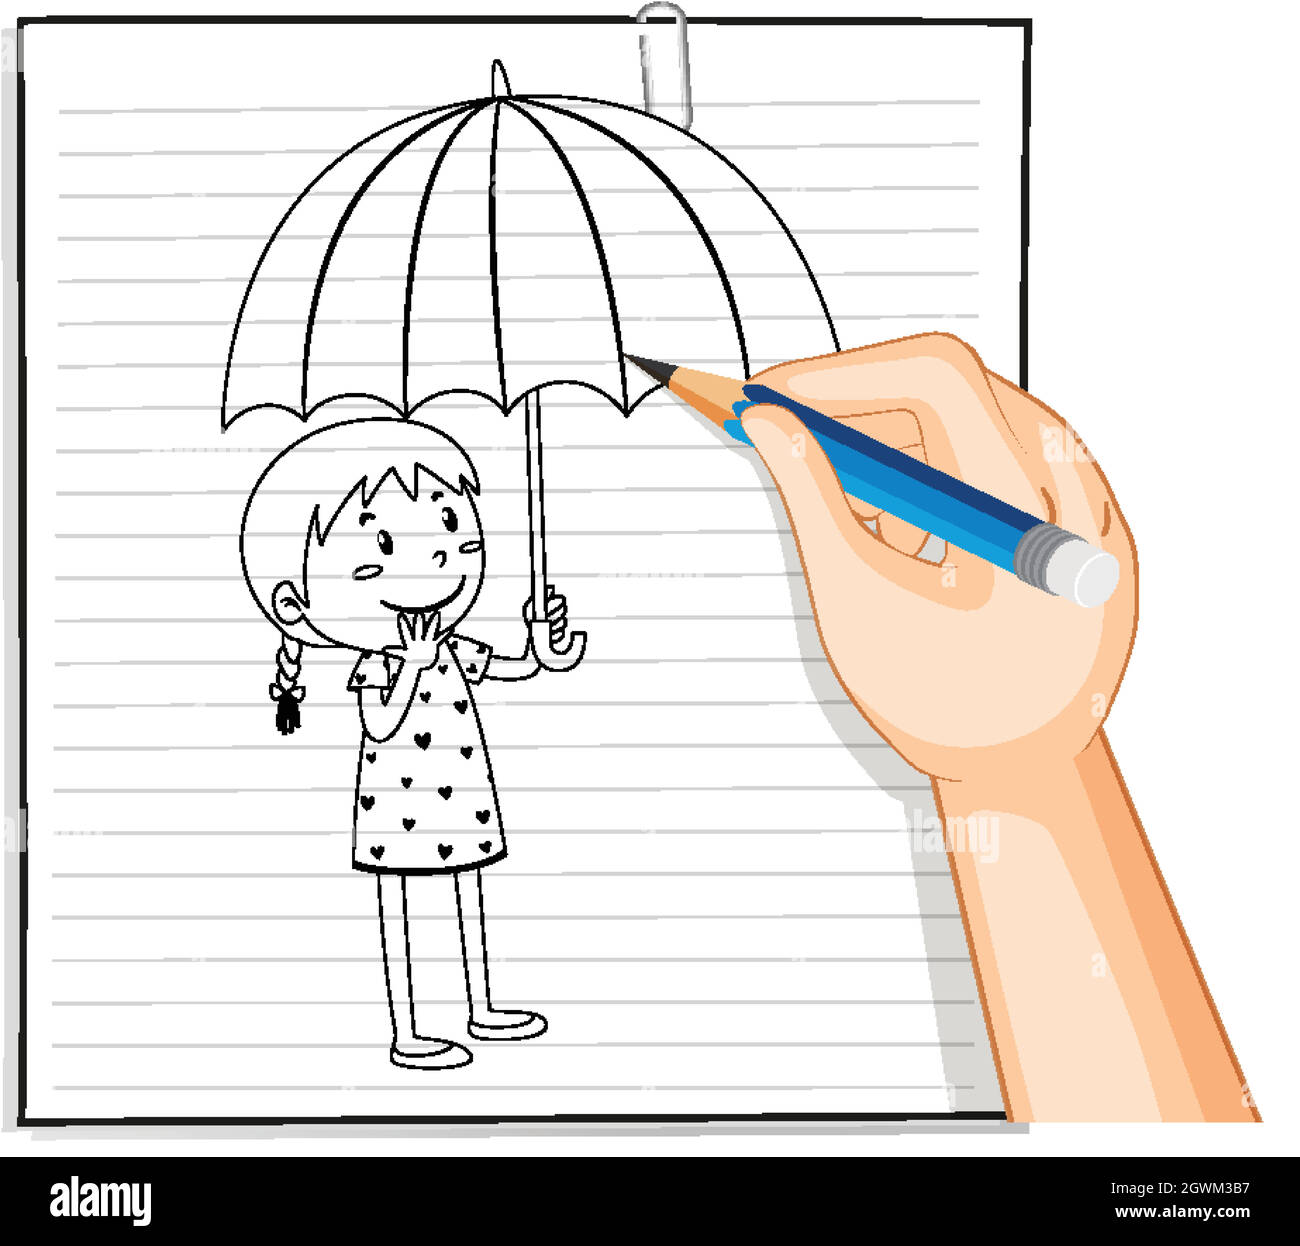 Easy way To Draw a Girl With Umbrella - Pencil Sketch || How To Draw a Girl  with umbrella. - YouTube